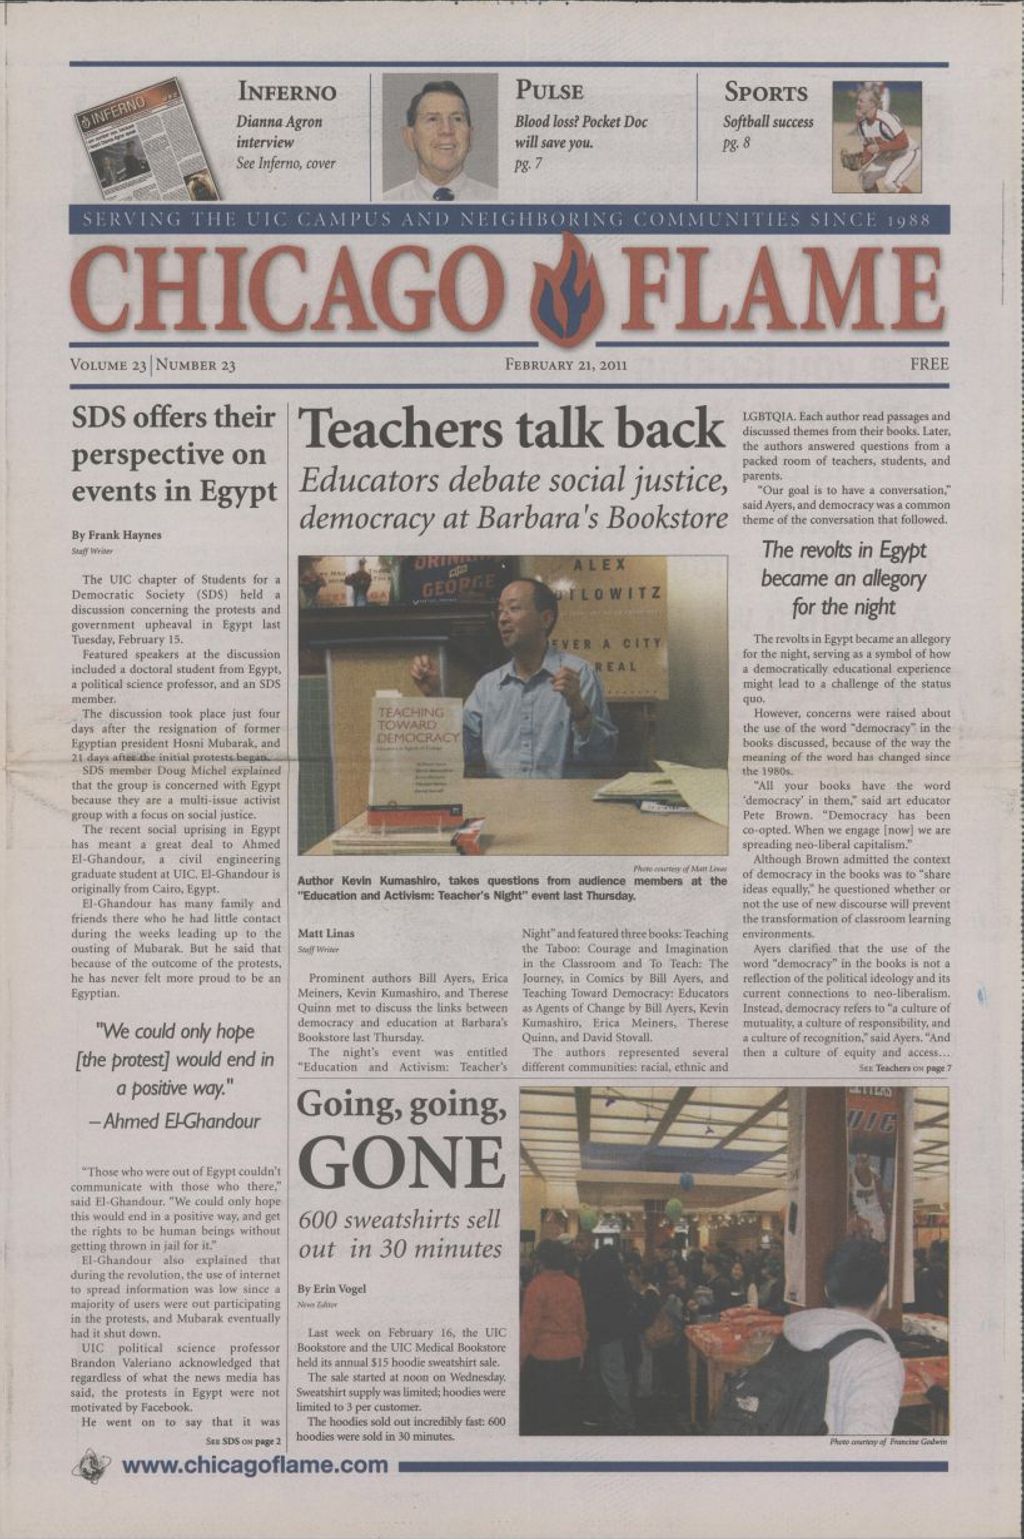 Miniature of Chicago Flame (February 21, 2011)